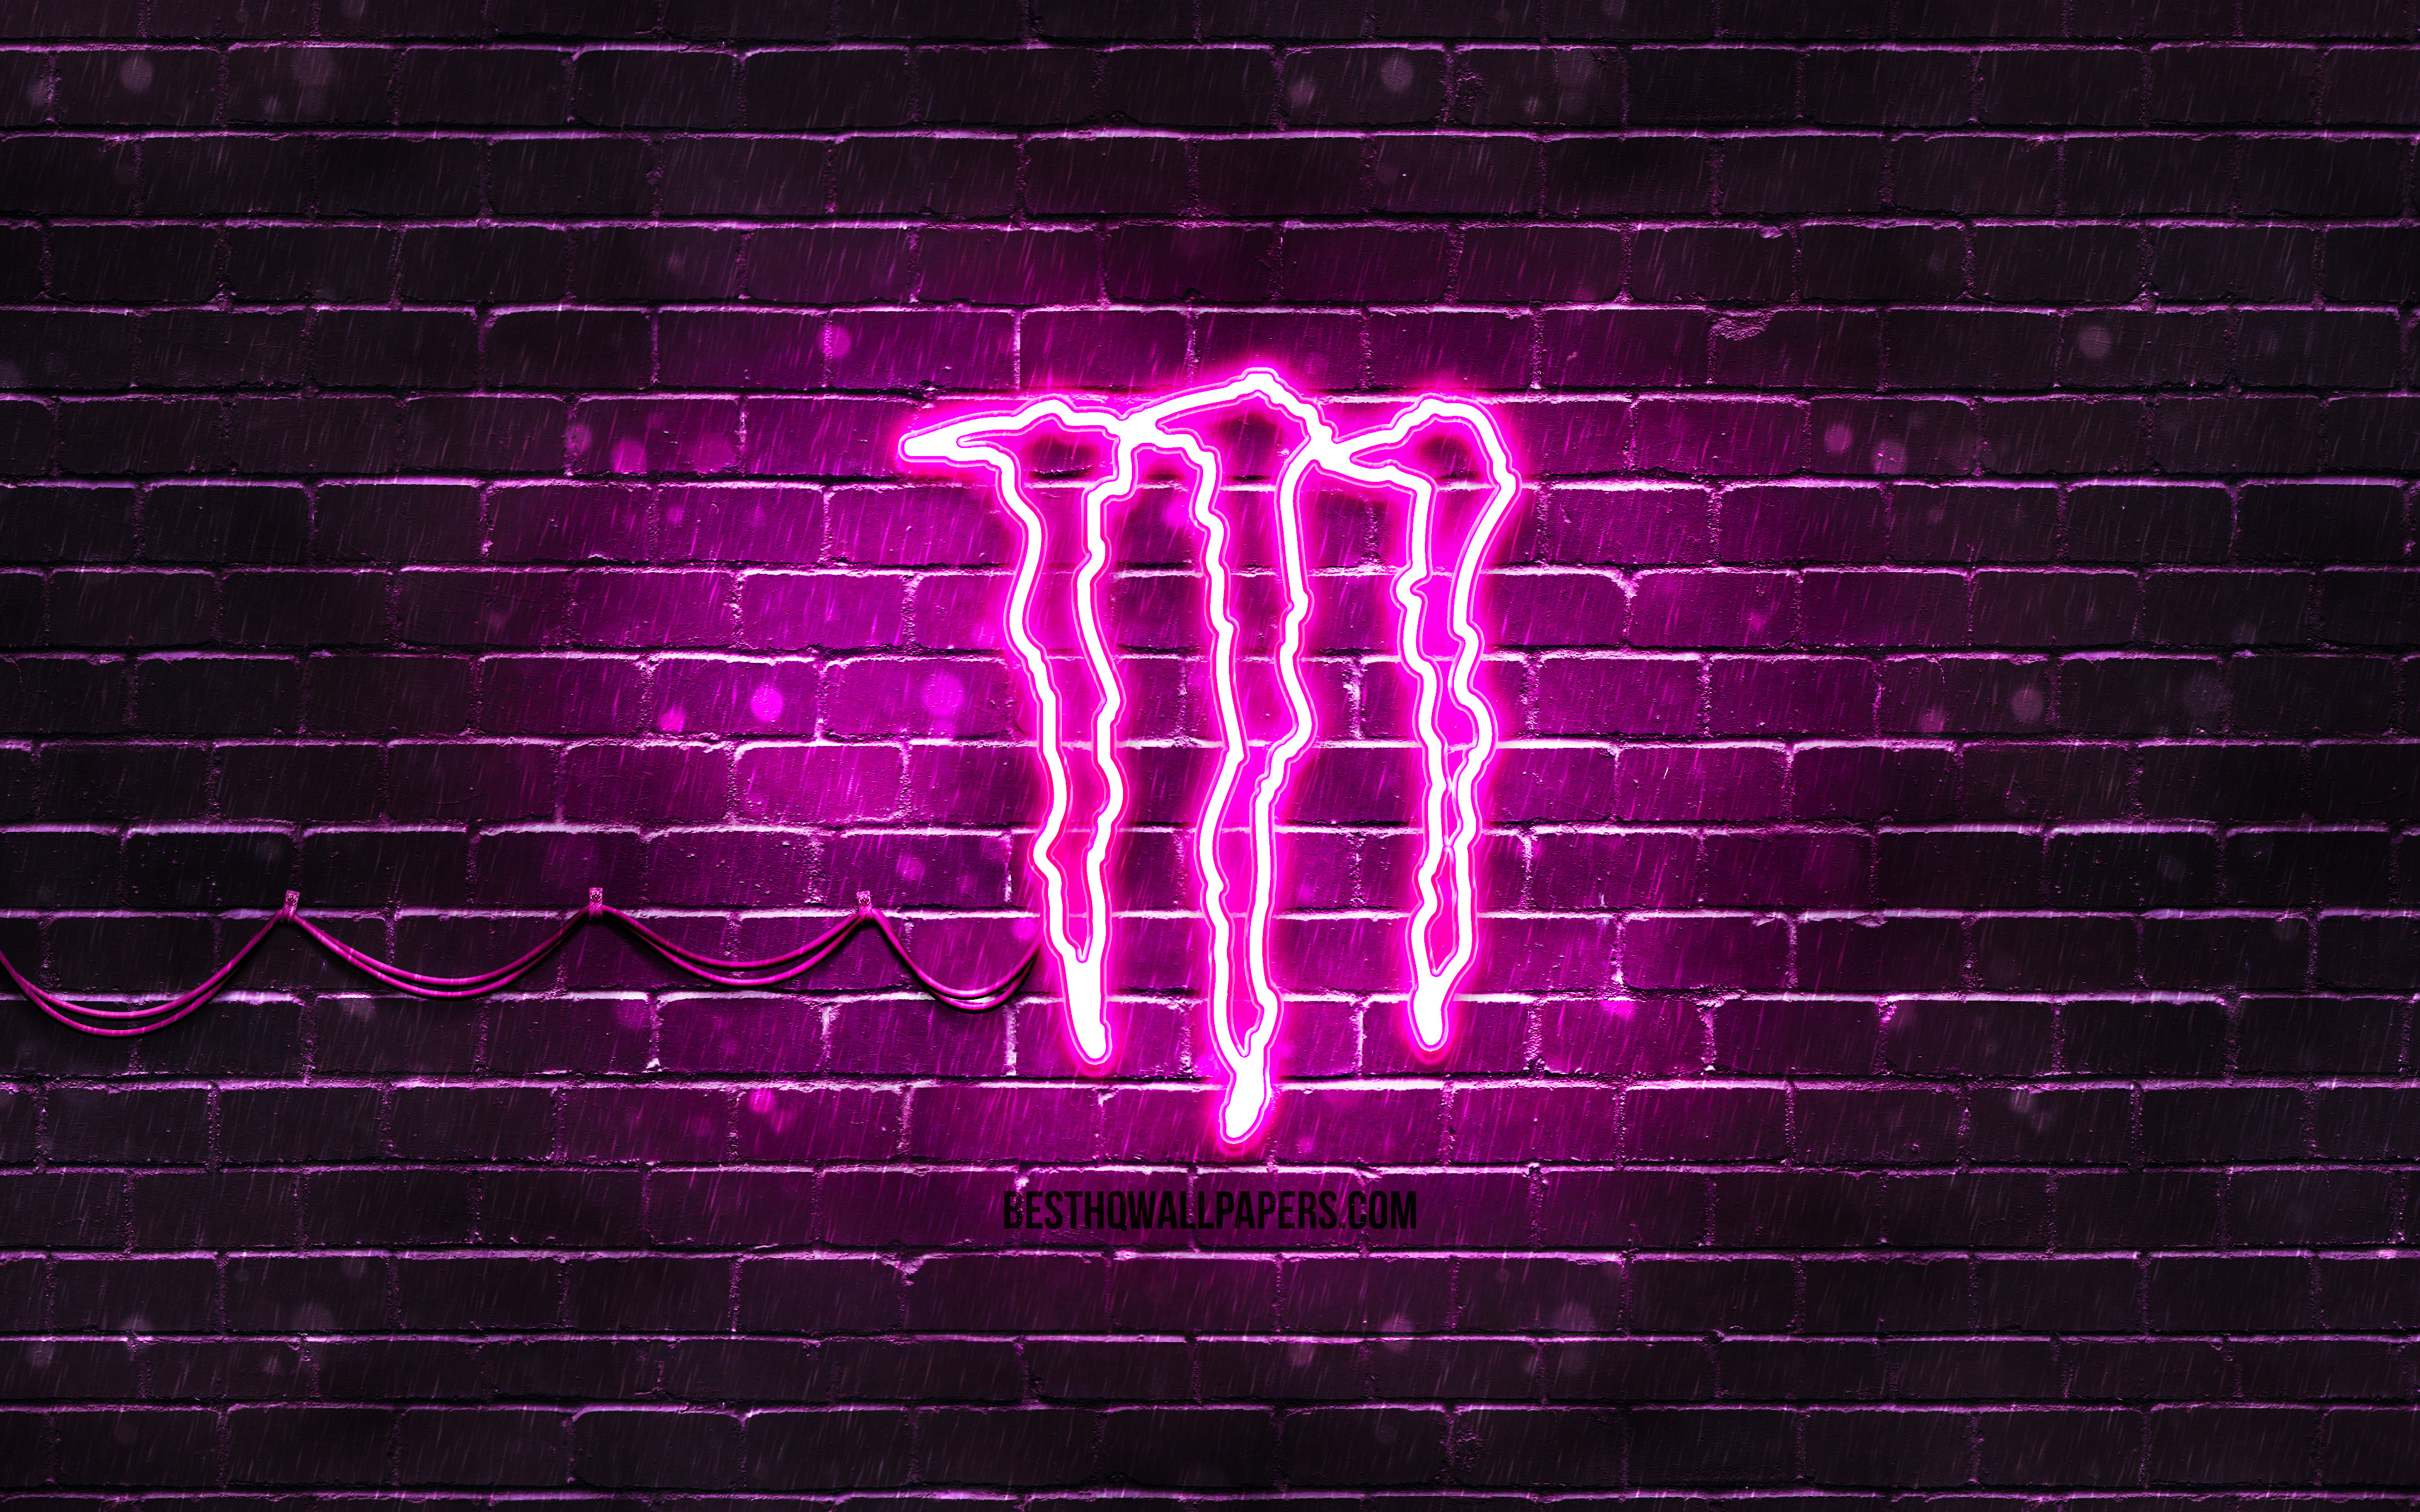 Download wallpaper Monster Energy purple logo, 4k, purple brickwall, Monster Energy logo, drinks brands, Monster Energy neon logo, Monster Energy for desktop with resolution 3840x2400. High Quality HD picture wallpaper